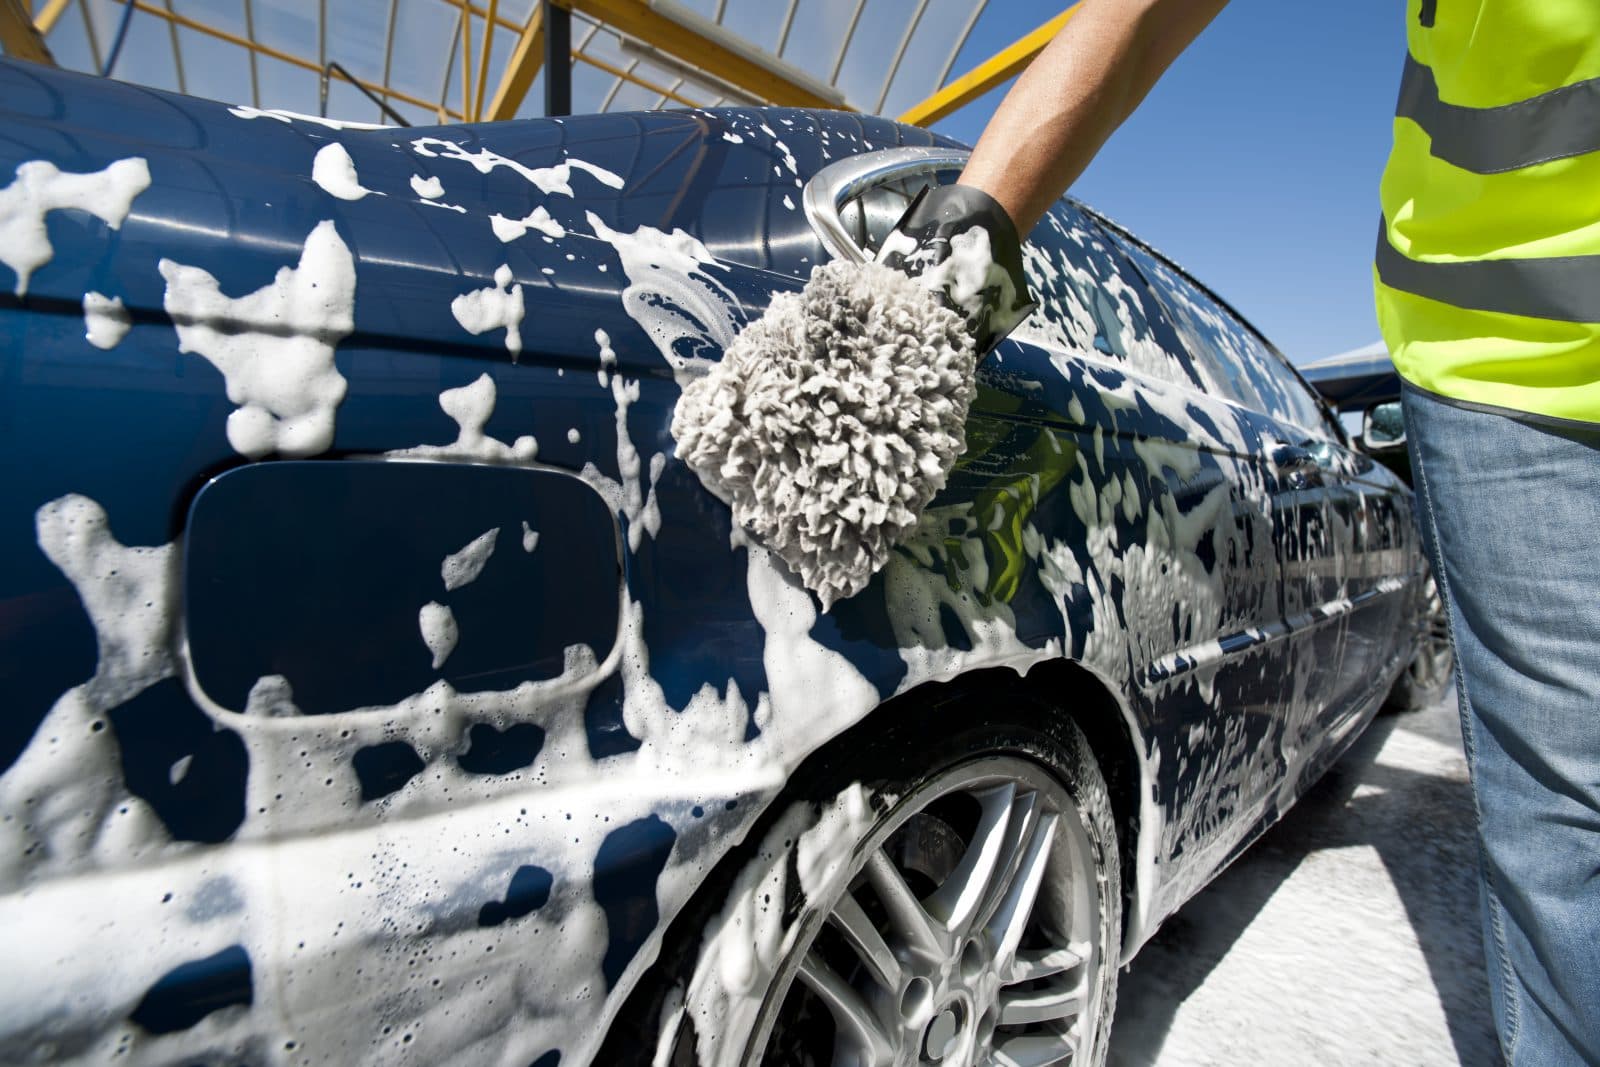 Best Value: What We Provide Free With Car Washes